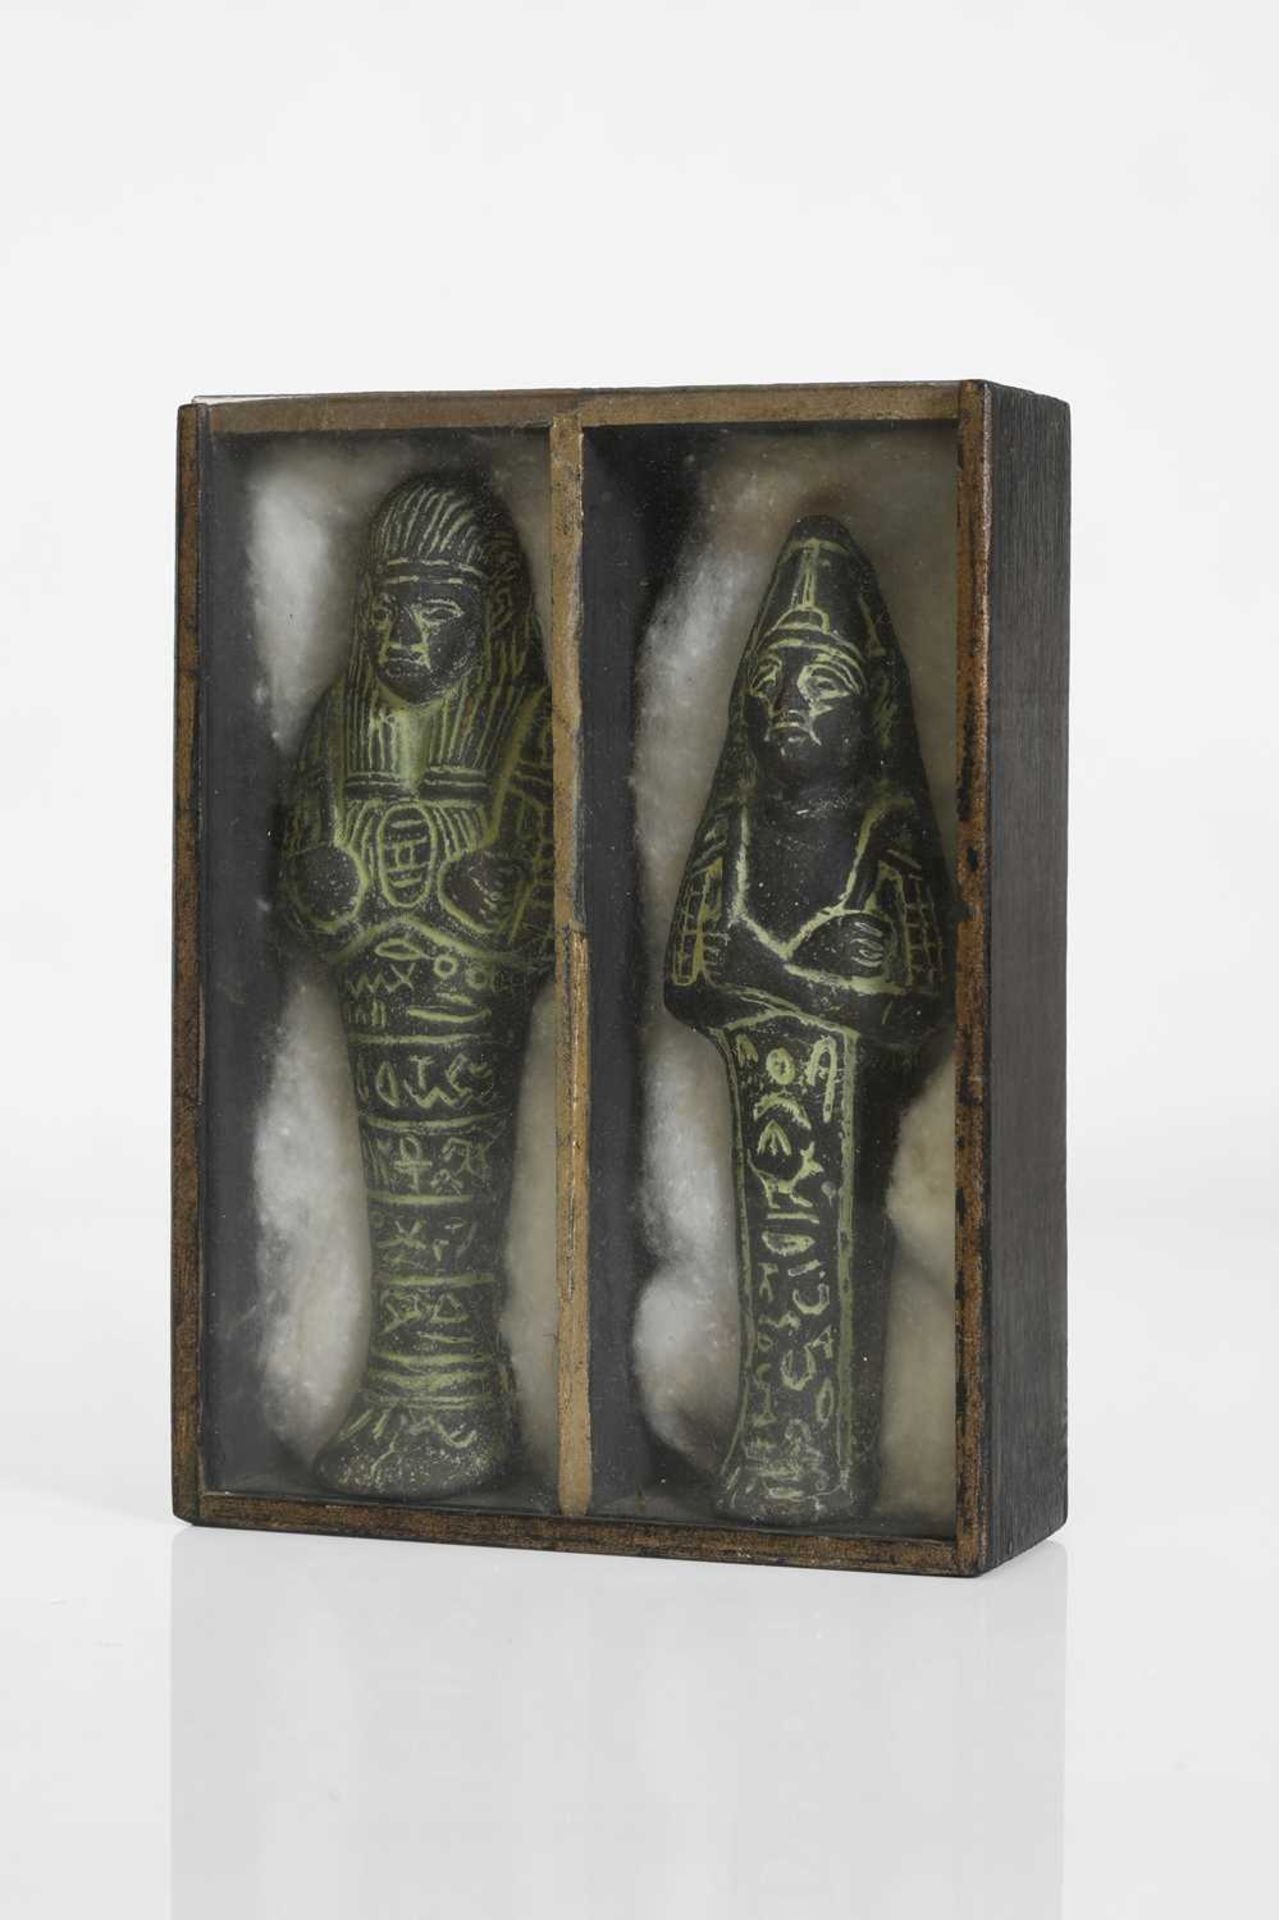 A pair of Egyptian-style clay ushabti figures, - Image 2 of 10